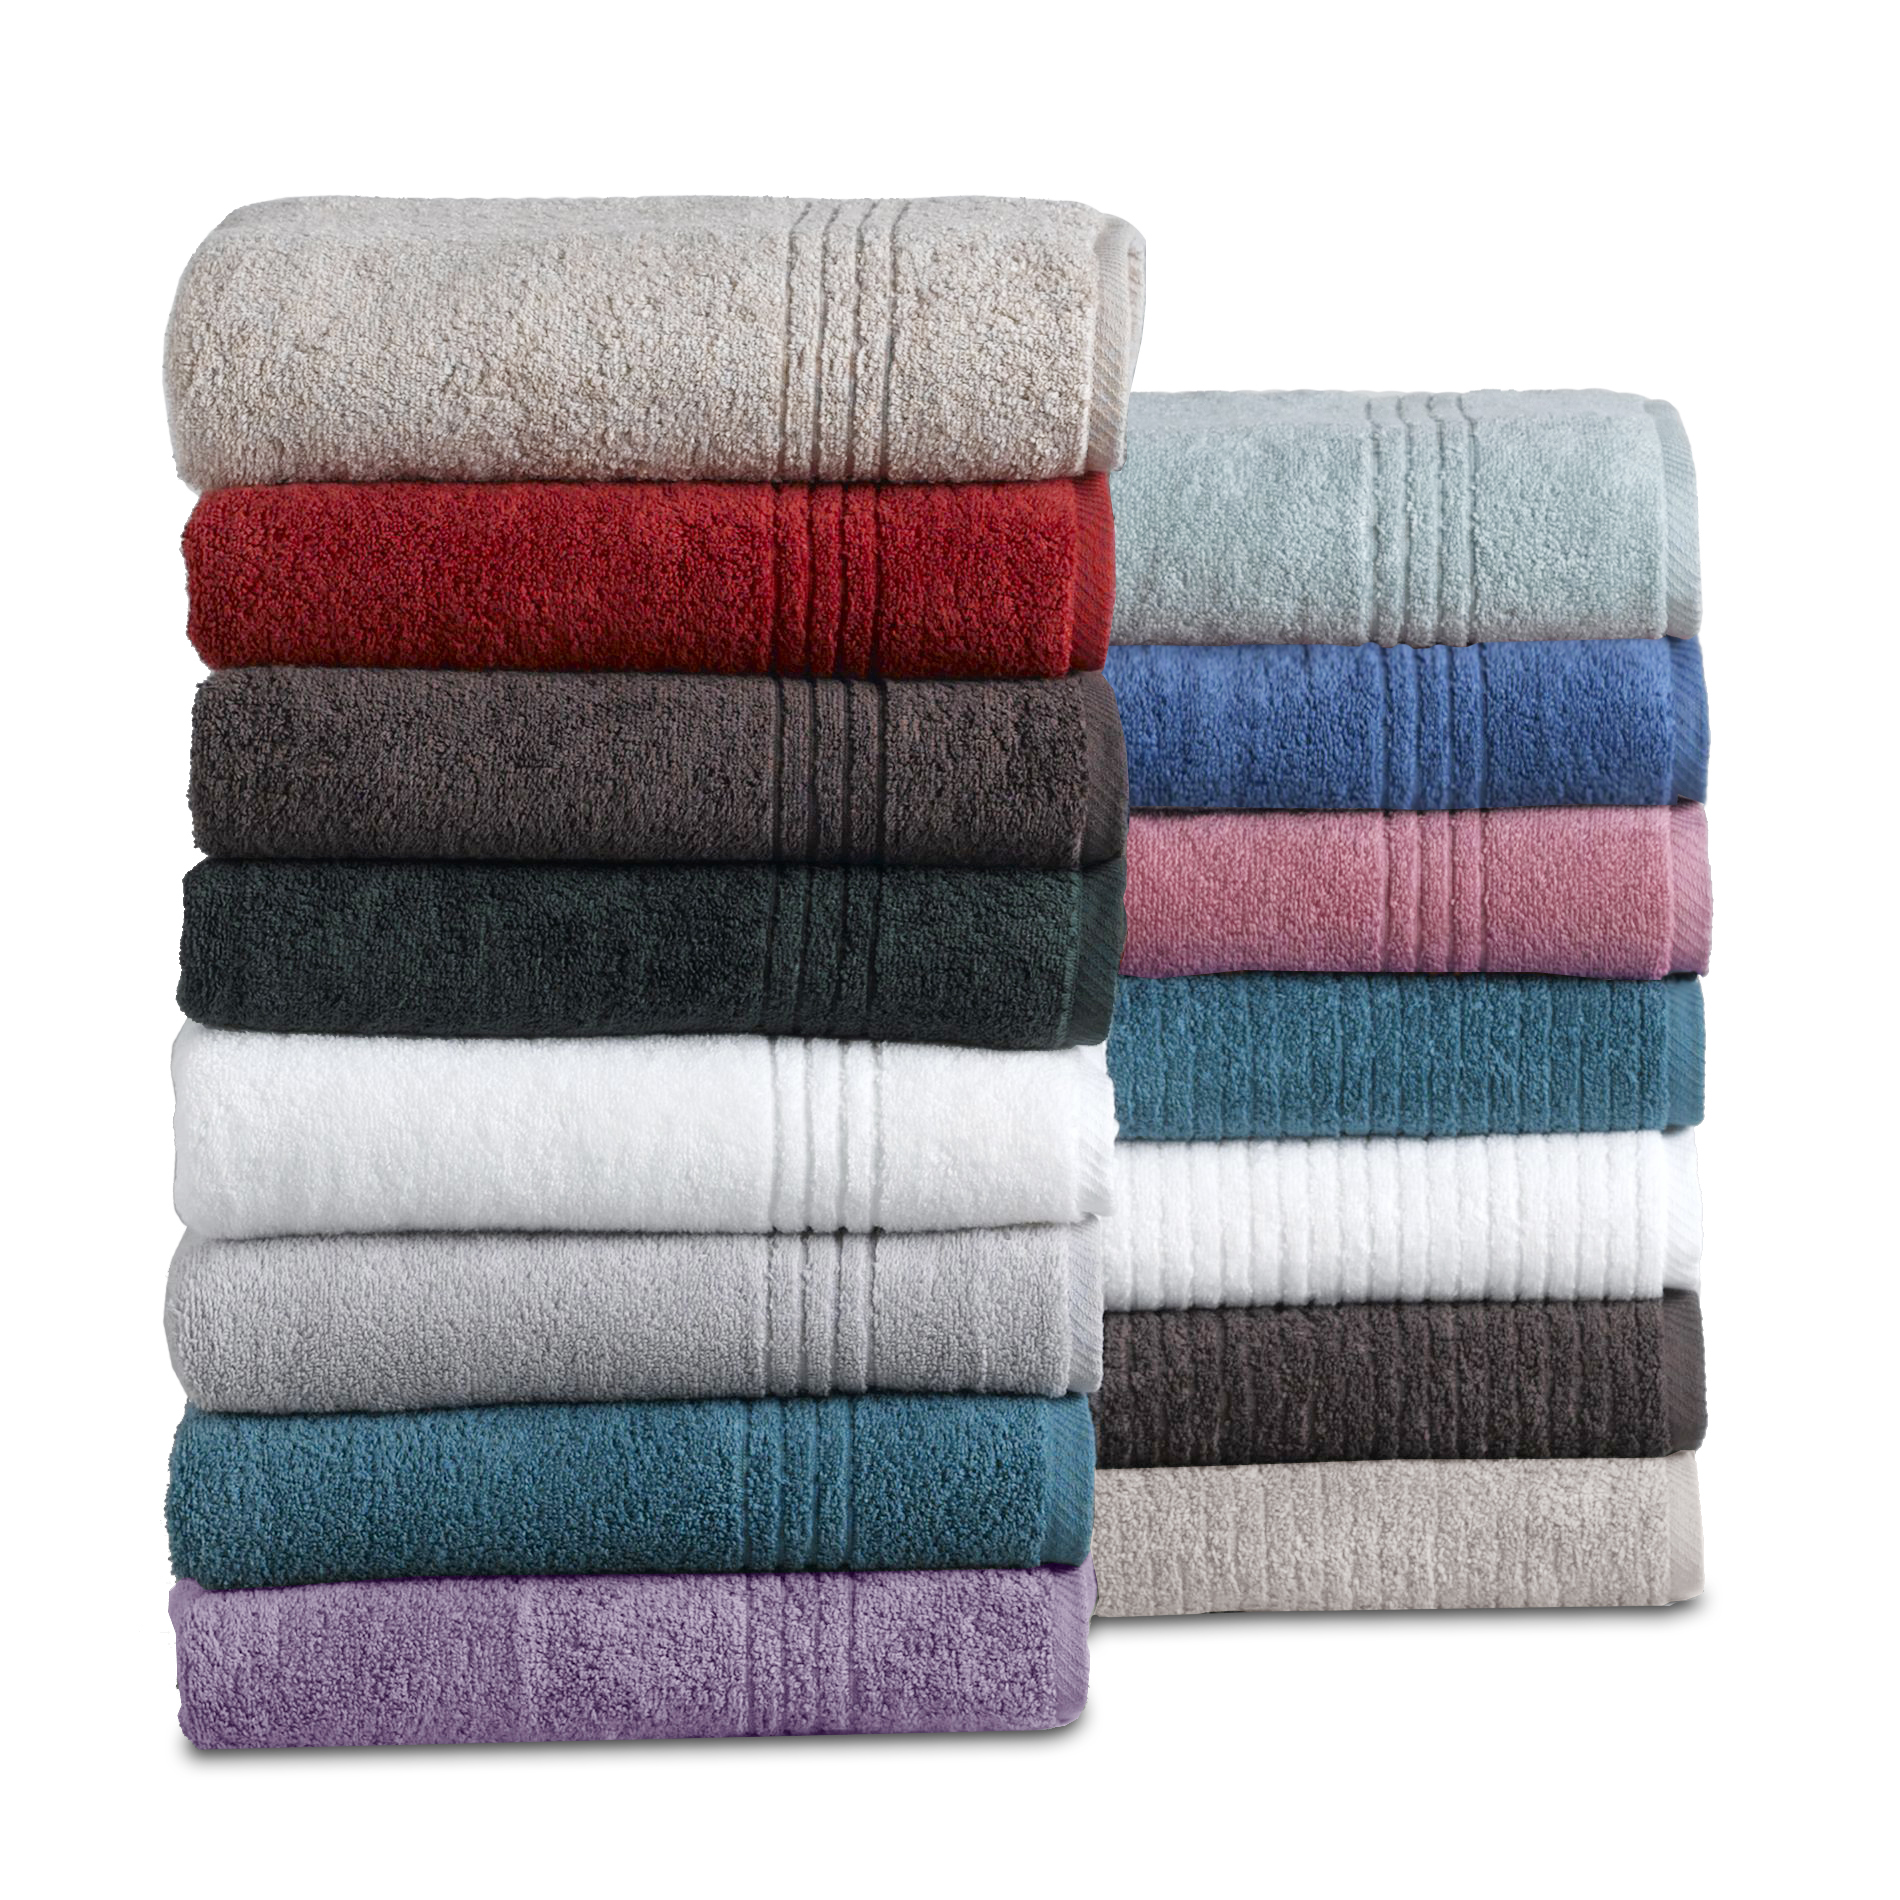 Cannon Quick Dry Bath Towel, Hand Towel, or Washcloth